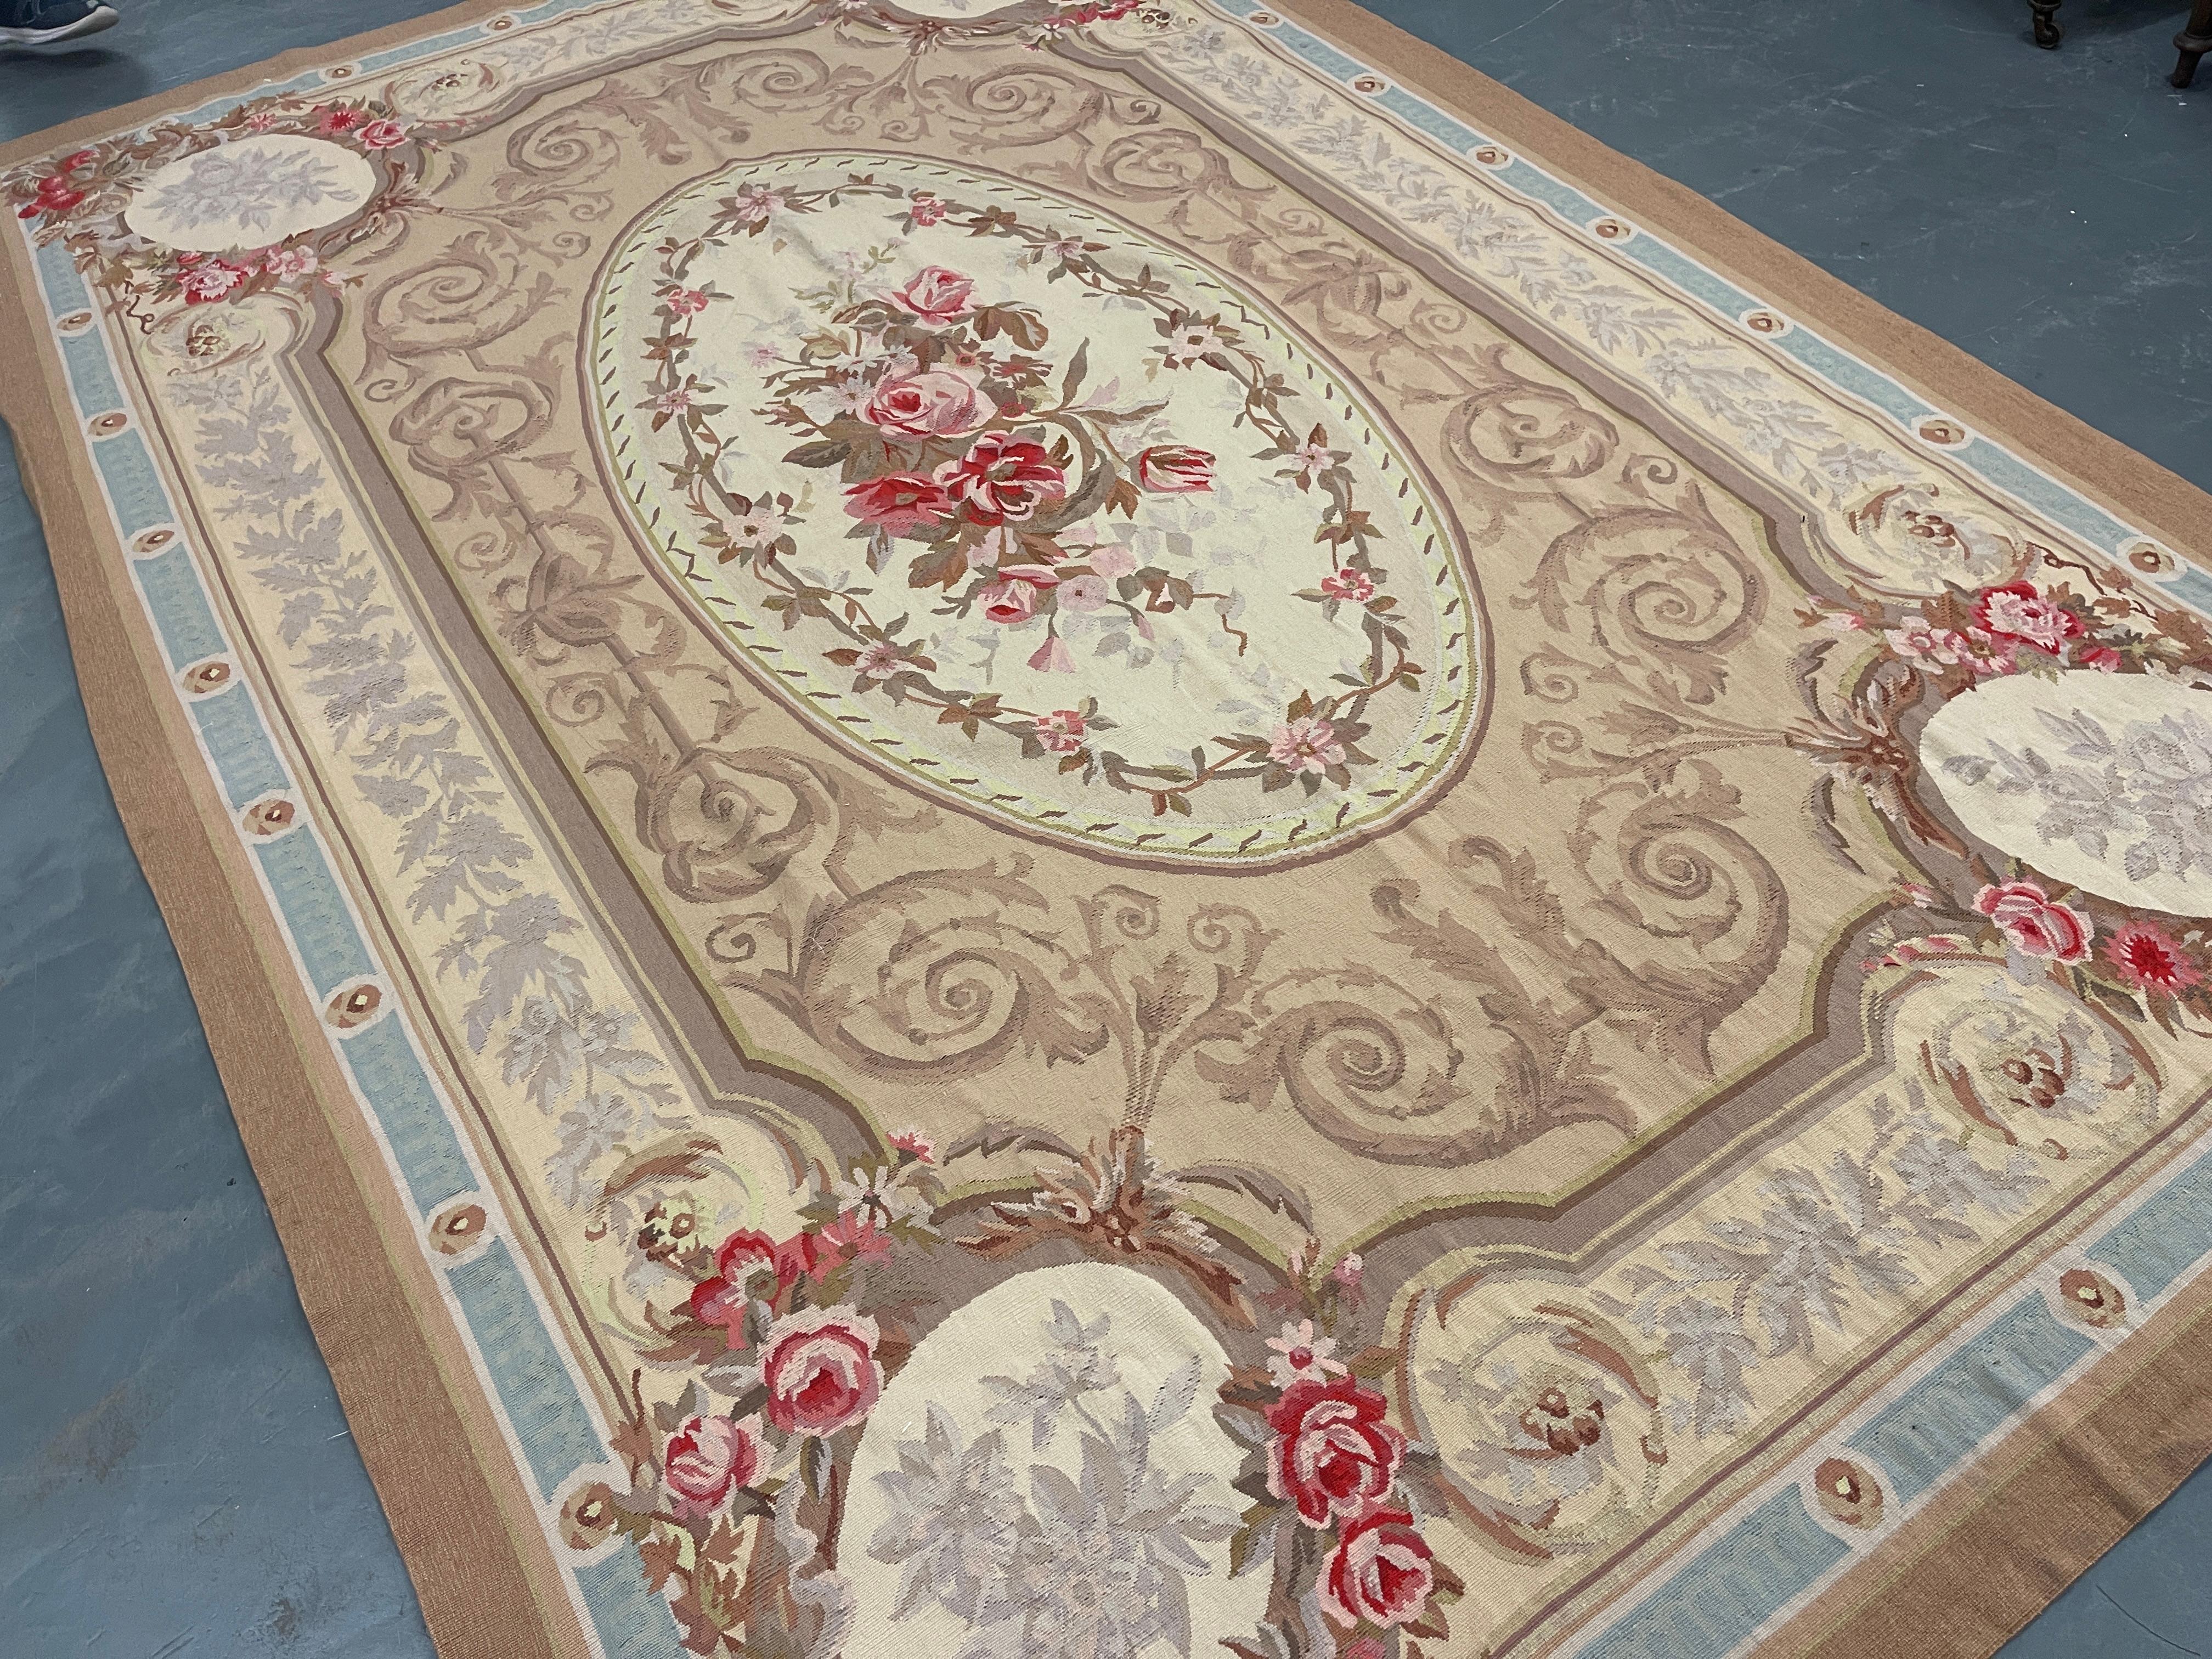 This fantastic area rug has been handwoven with a beautiful symmetrical floral design woven on an ivory blue background with cream green and ivory accents. This elegant piece's colour and design make it the perfect accent rug.
This rug style is best